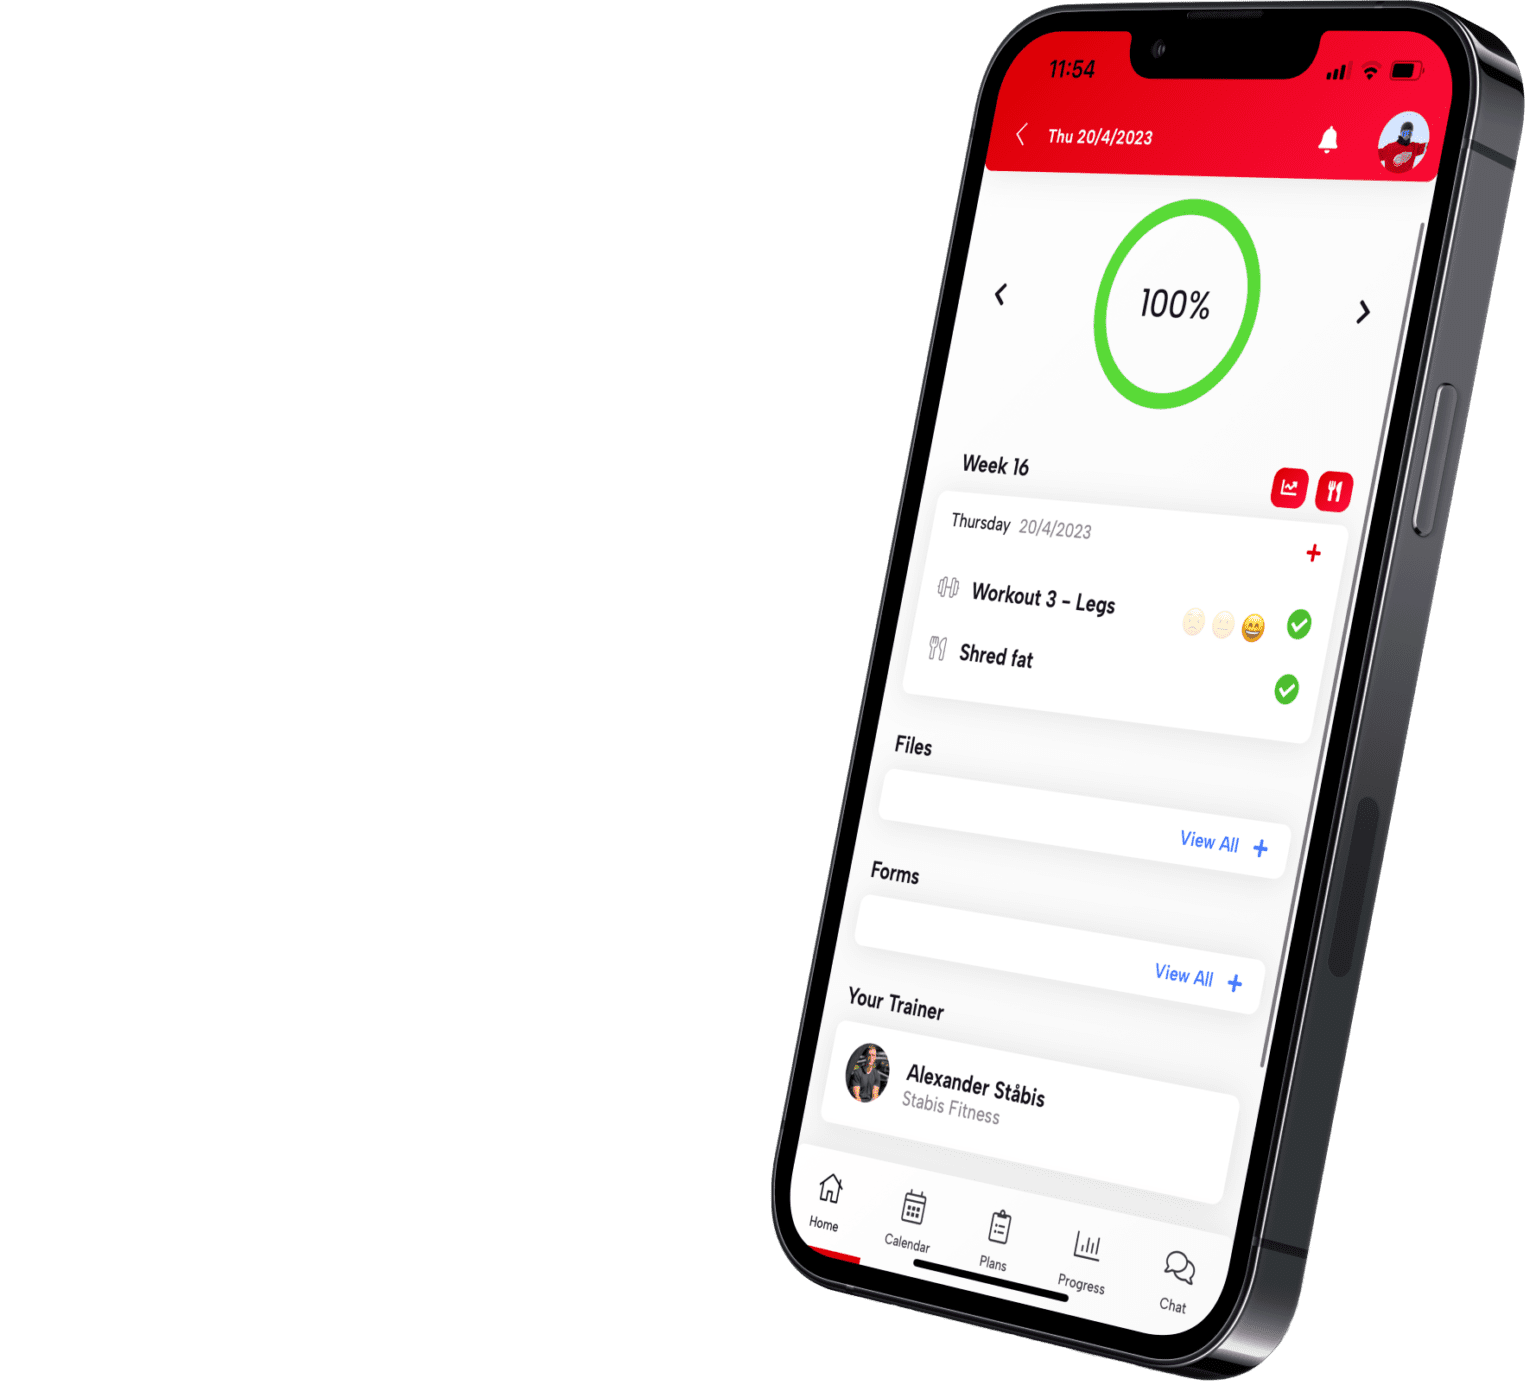 Your complete day in Coaching App.